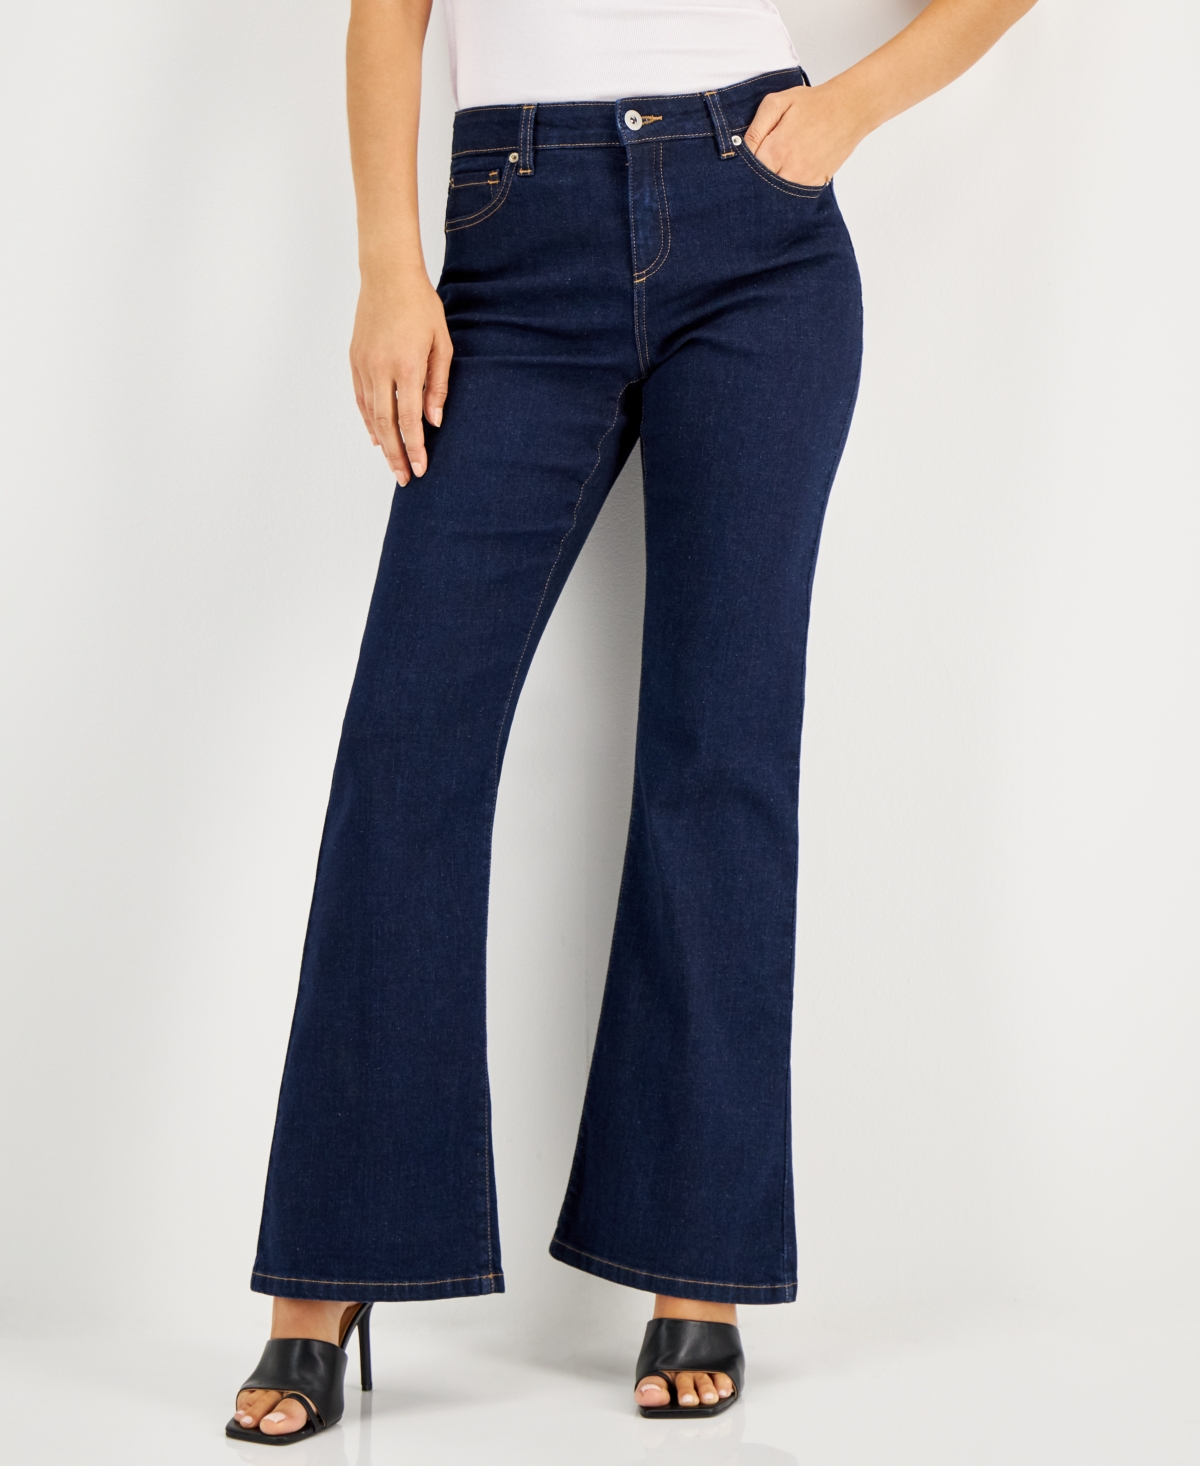  Inc International Concepts Women's Flare-Leg Jeans, Created for Macy's